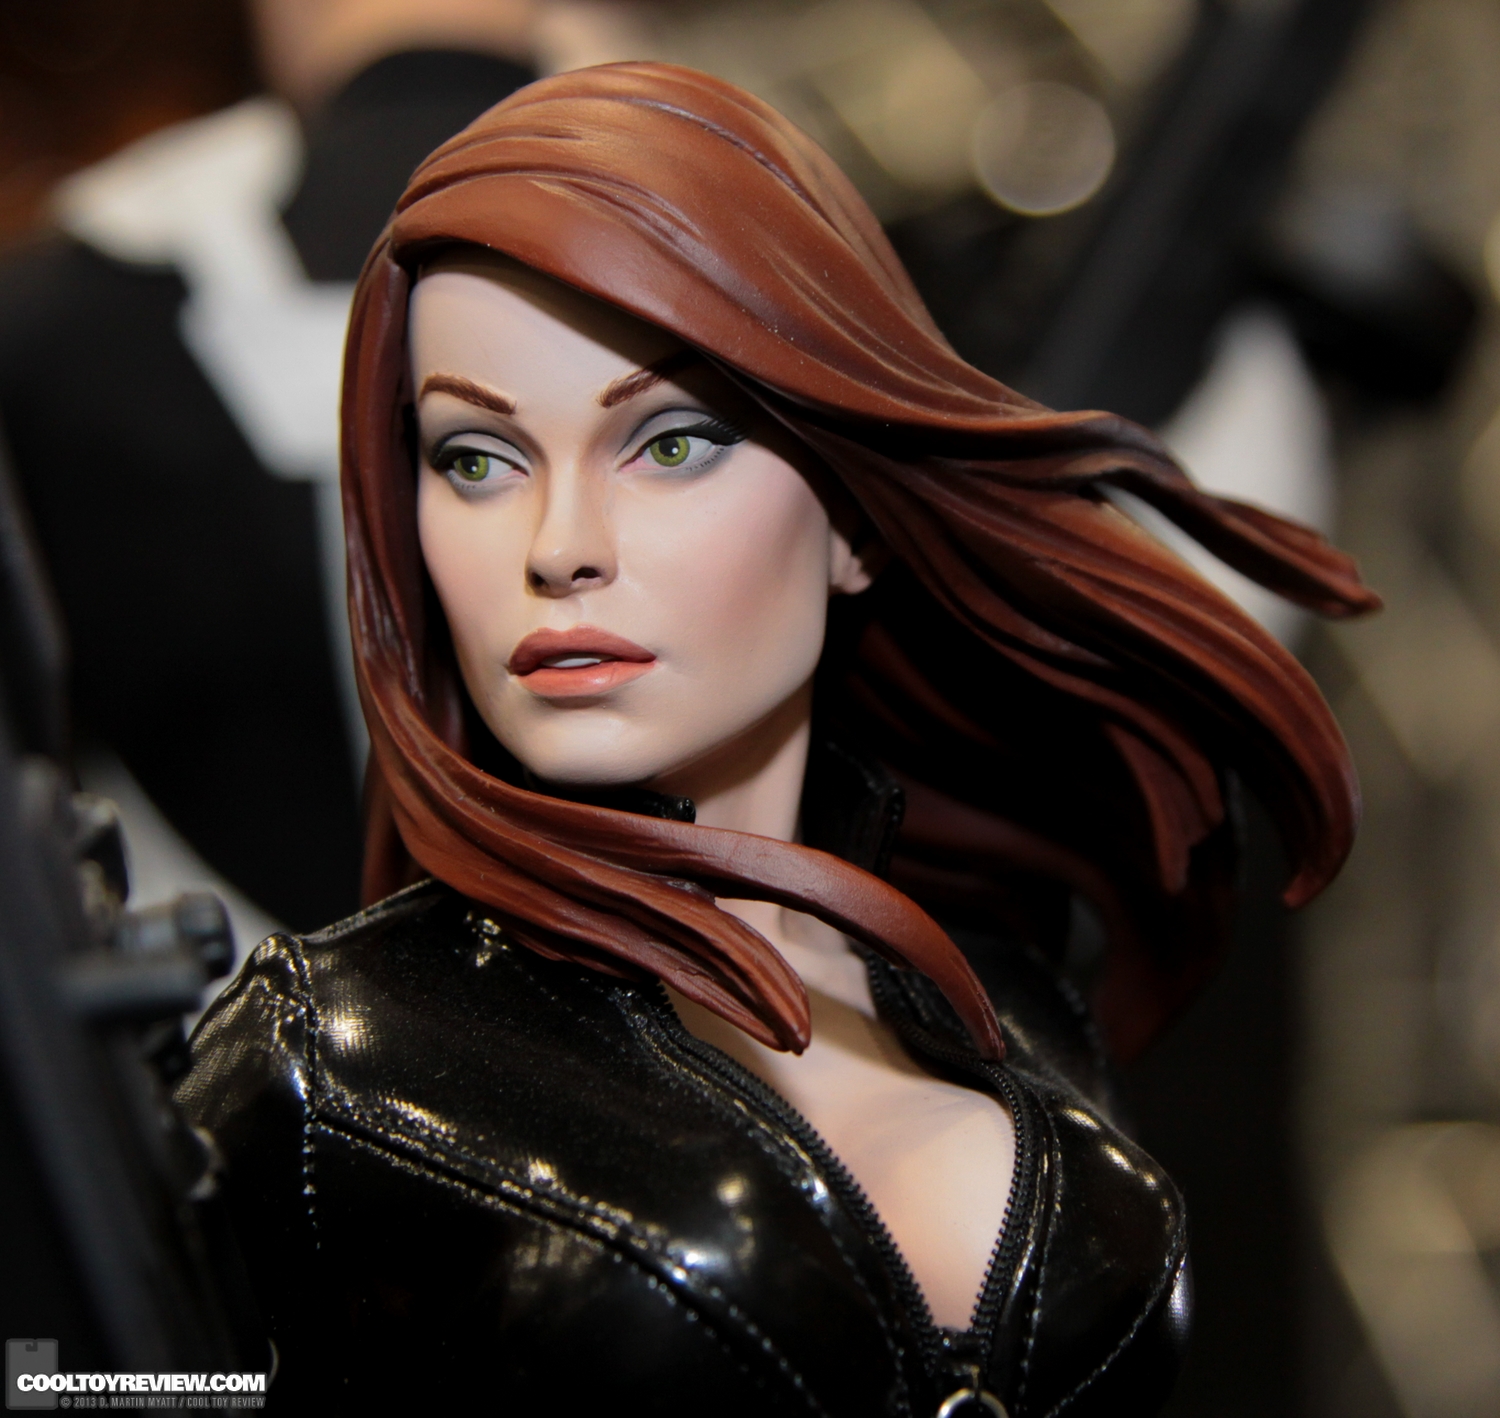 SDCC_2013_Sideshow_Collectibles_Thursday-140.jpg